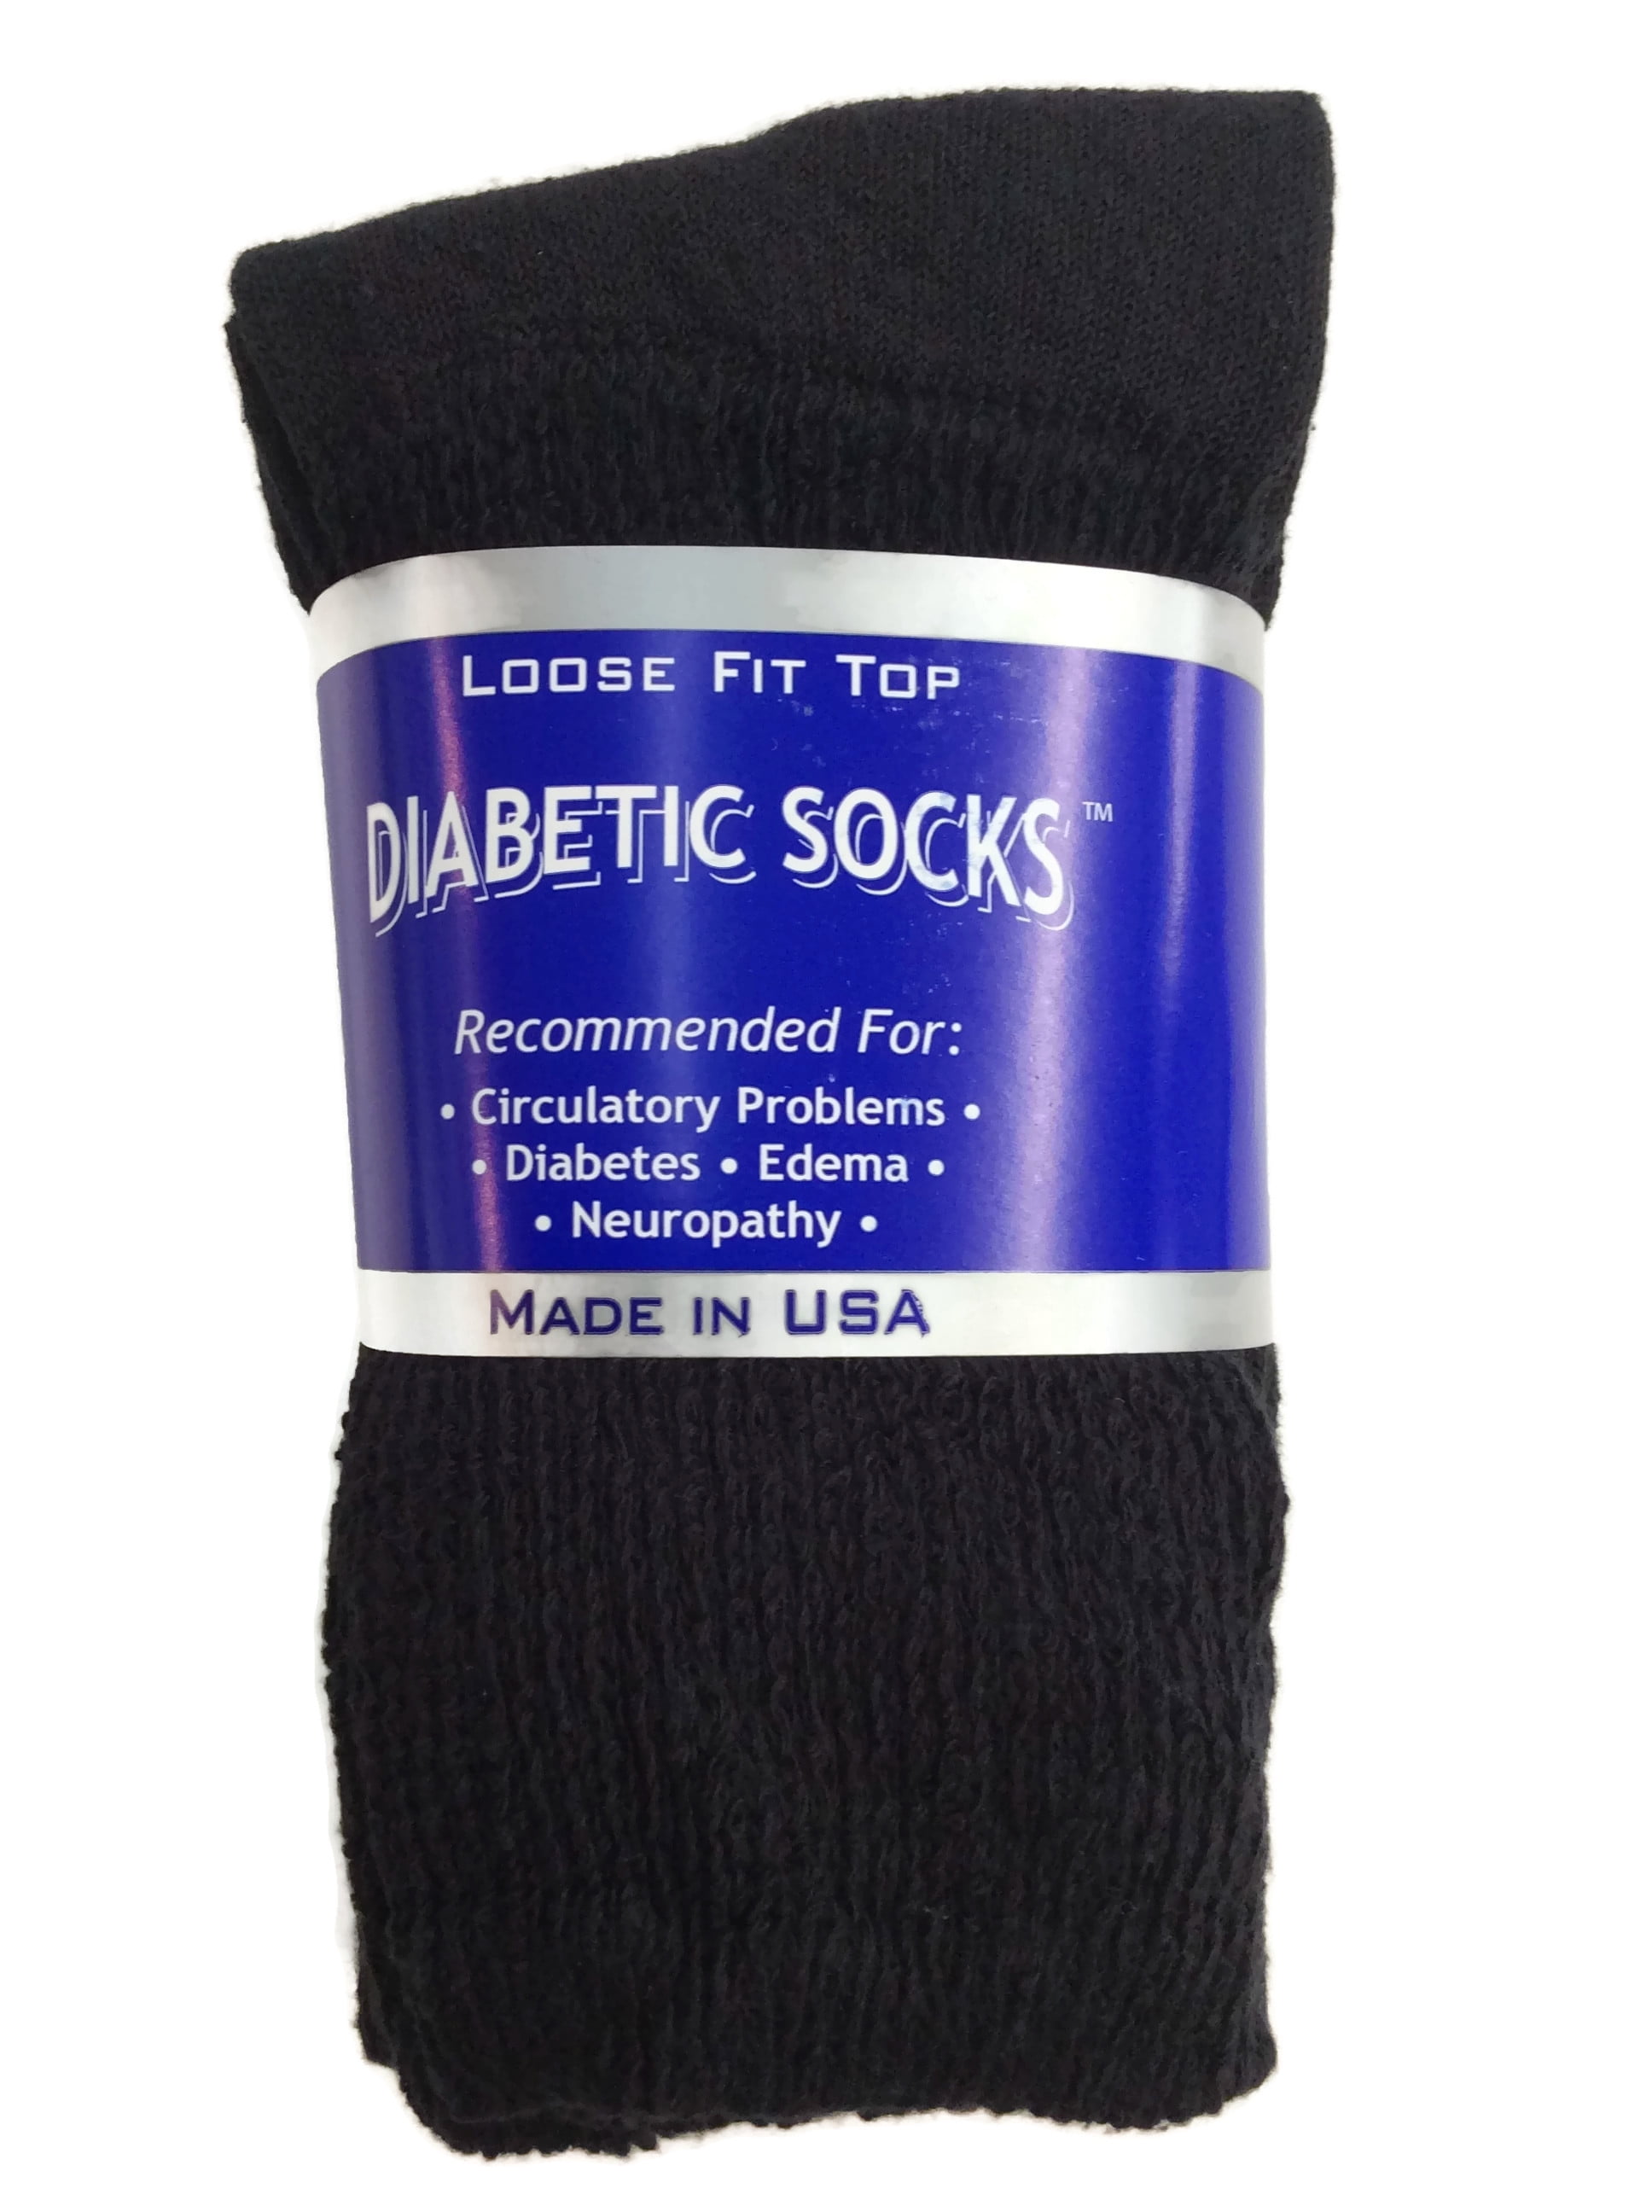 3 Pair Unisex Diabetic Socks. Size 10-13 A. New Free Shipping In U.S White 